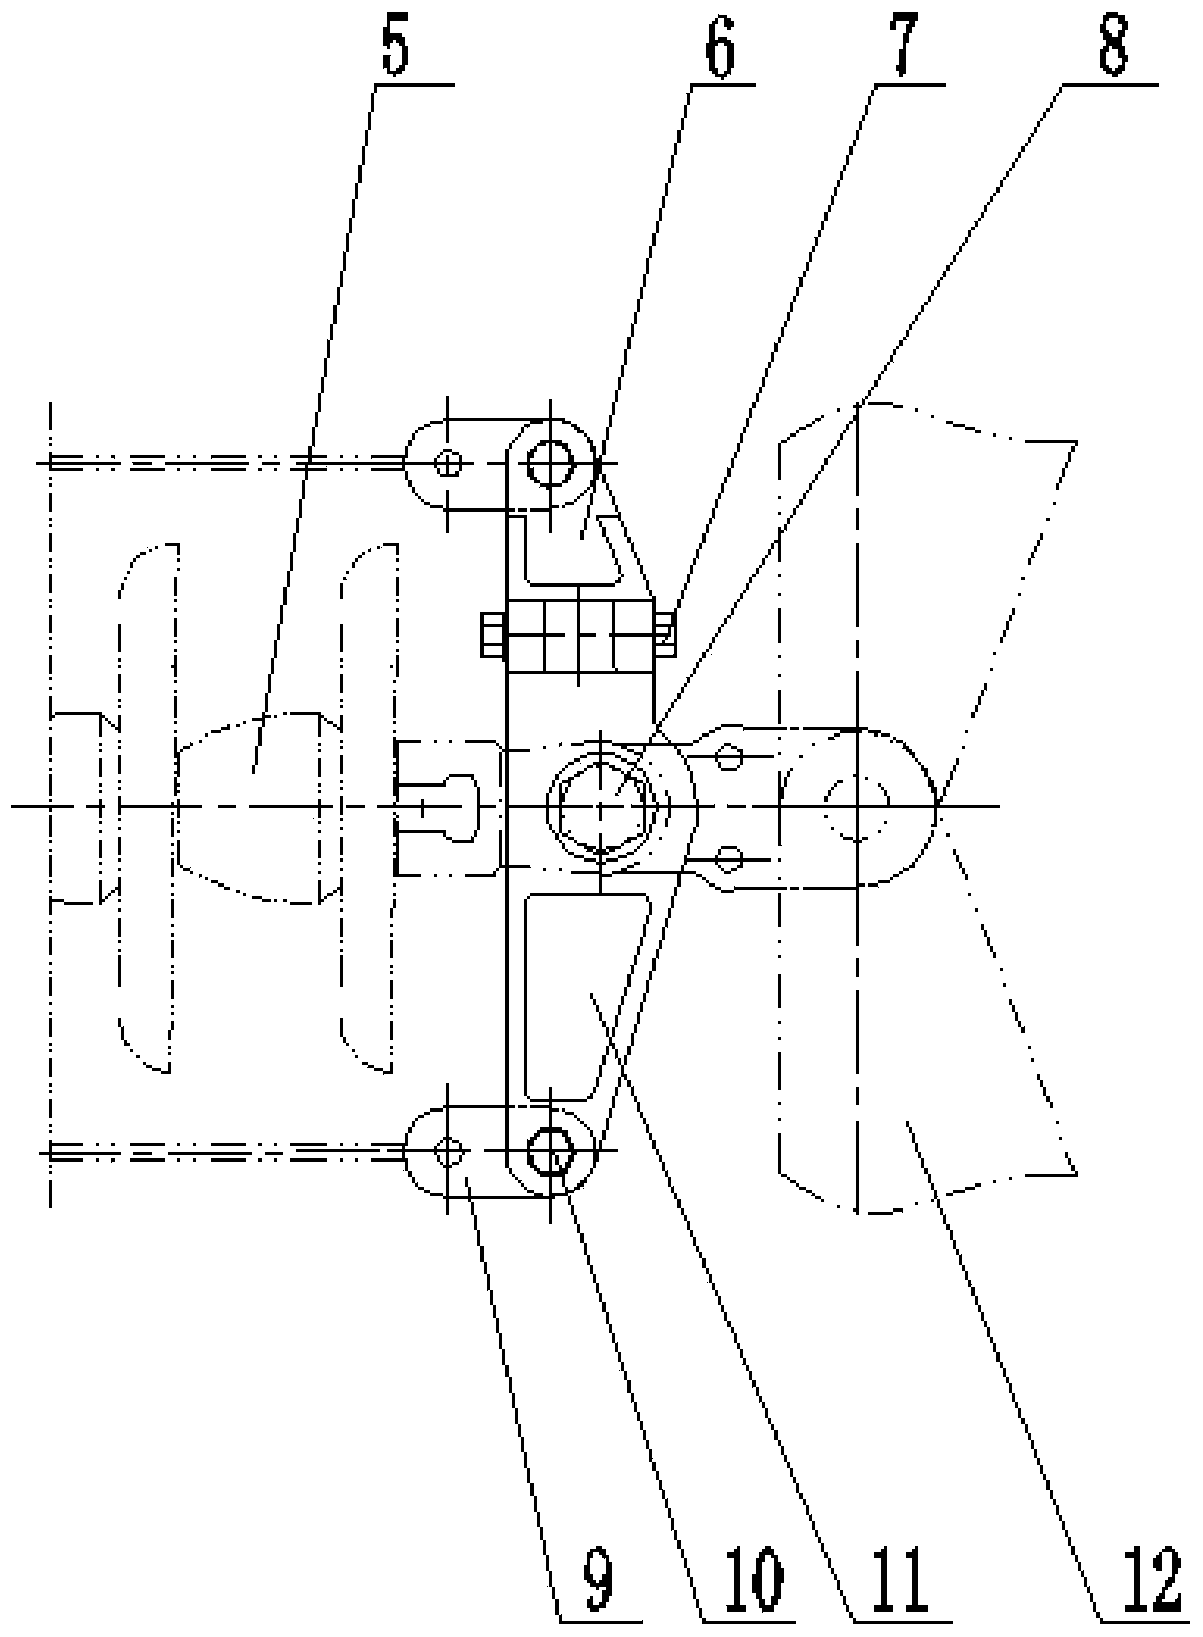 Anti-tension triple-connected middle string clamp for 1,000kV ultrahigh-voltage power transmission line